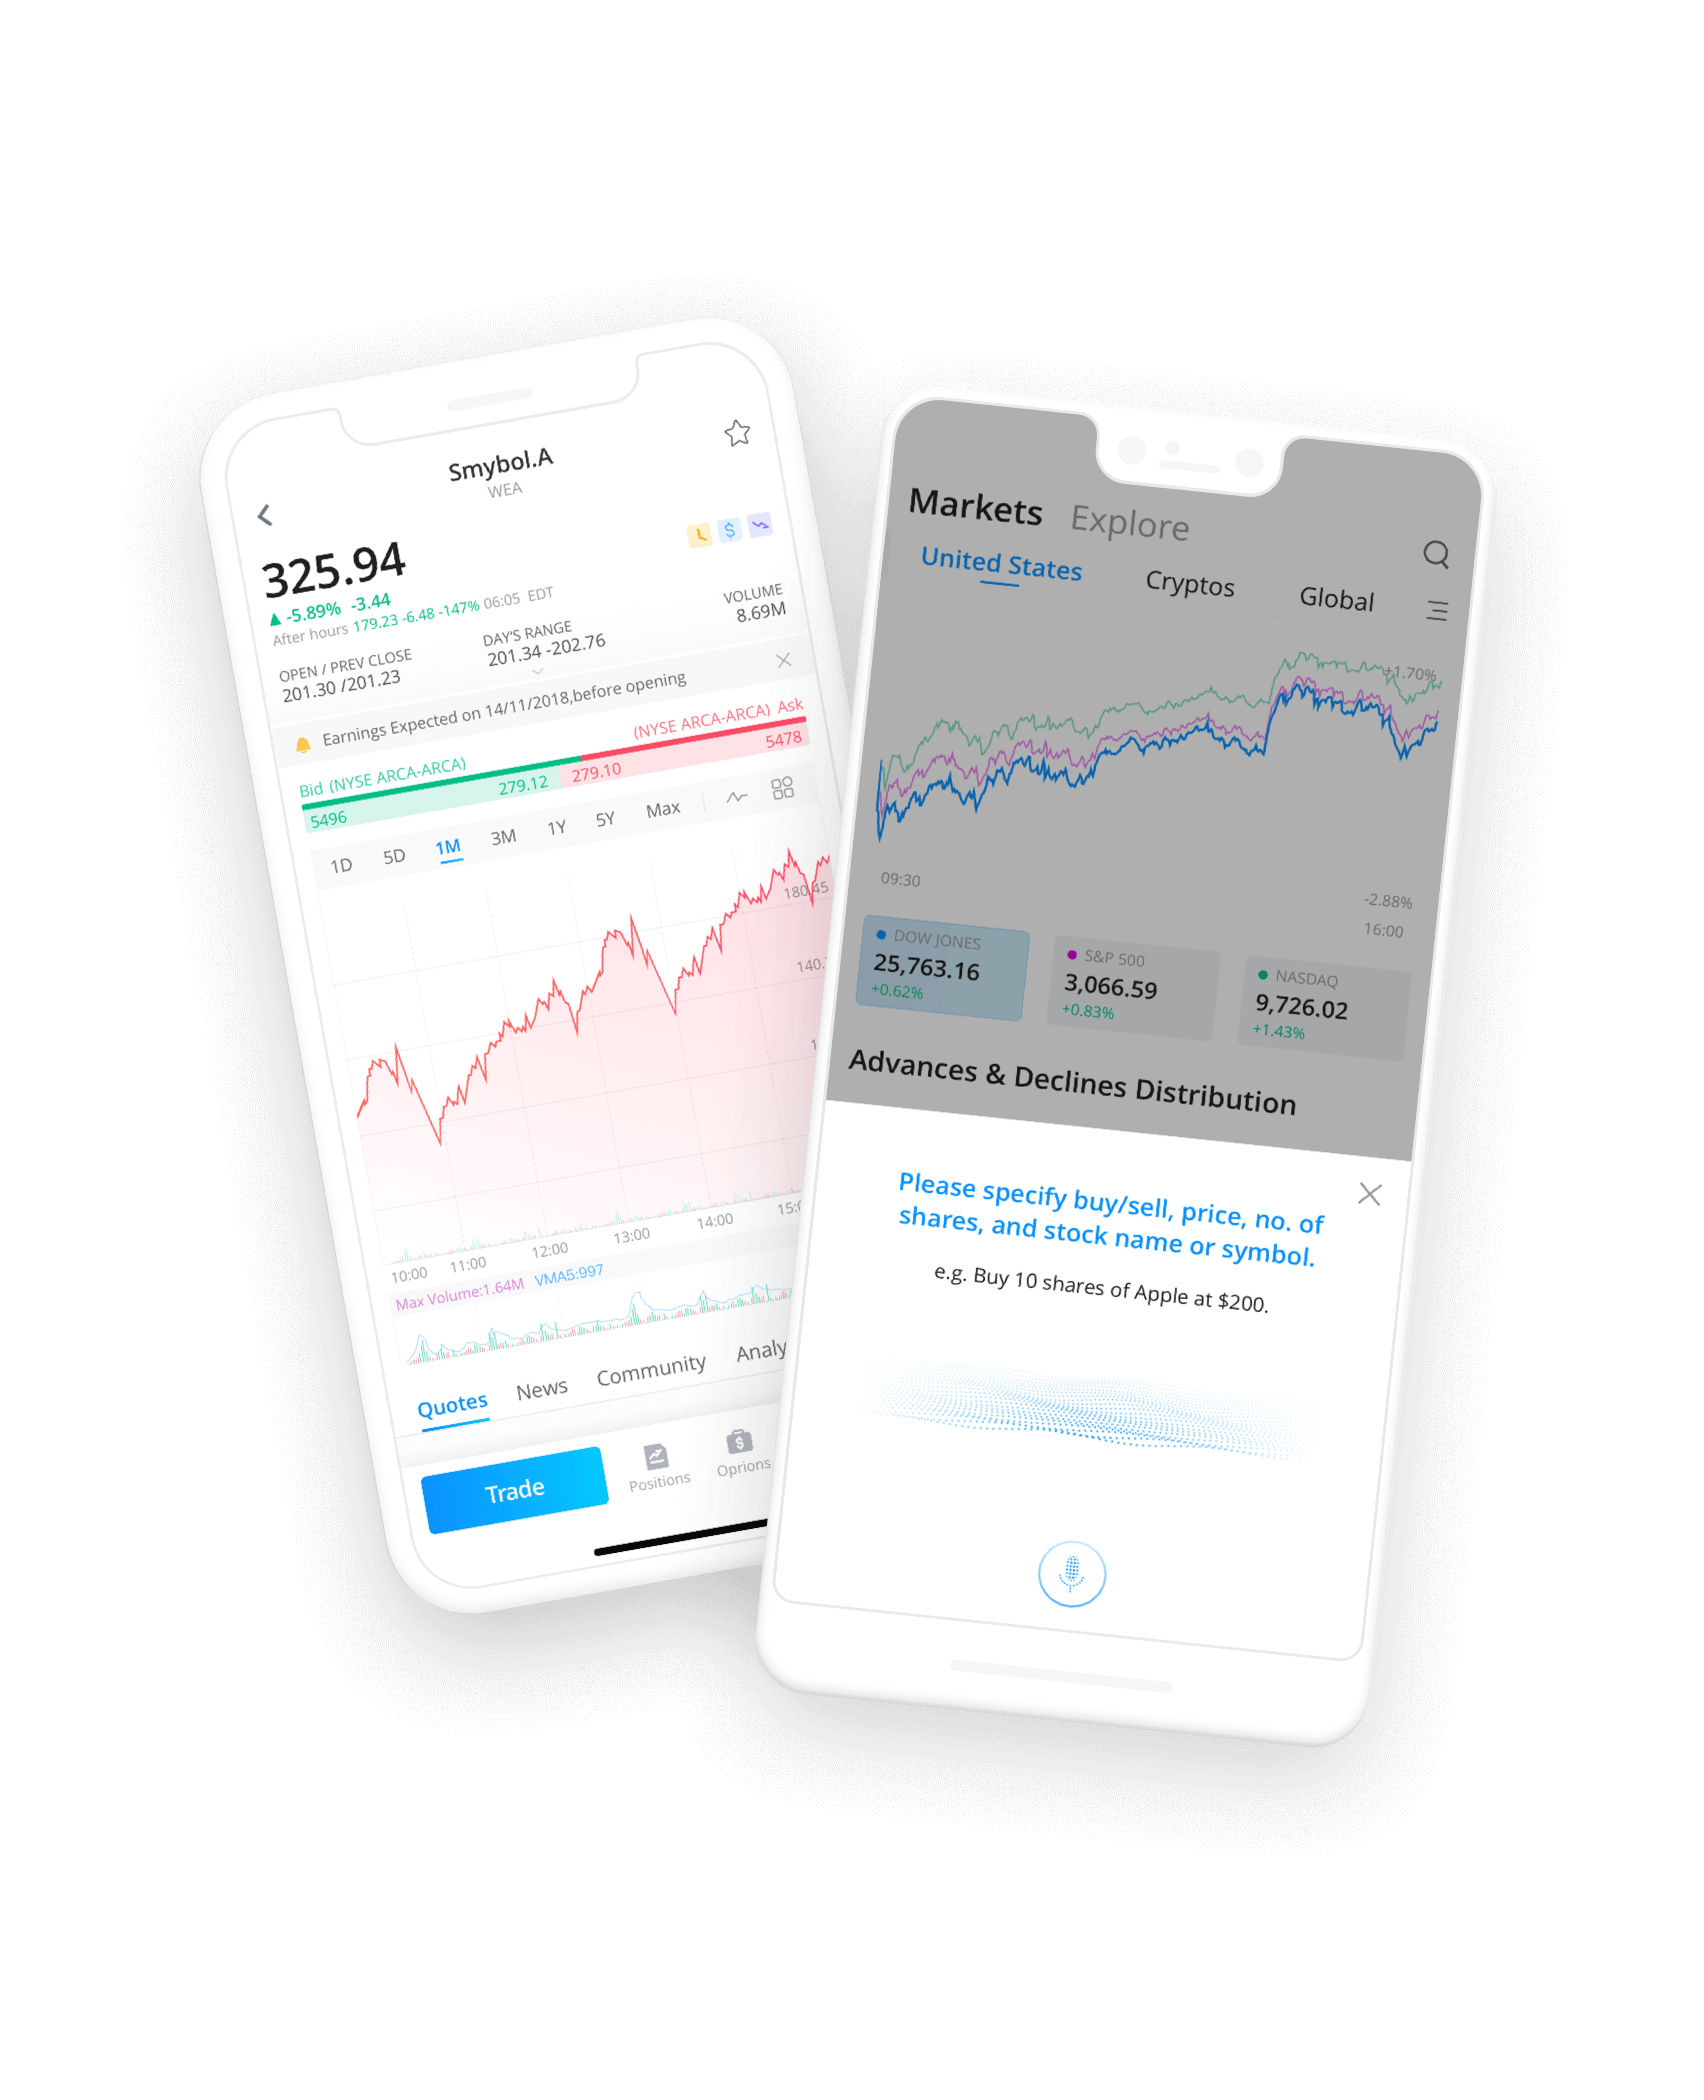 Webull - Download and Start Trading Stocks for Free